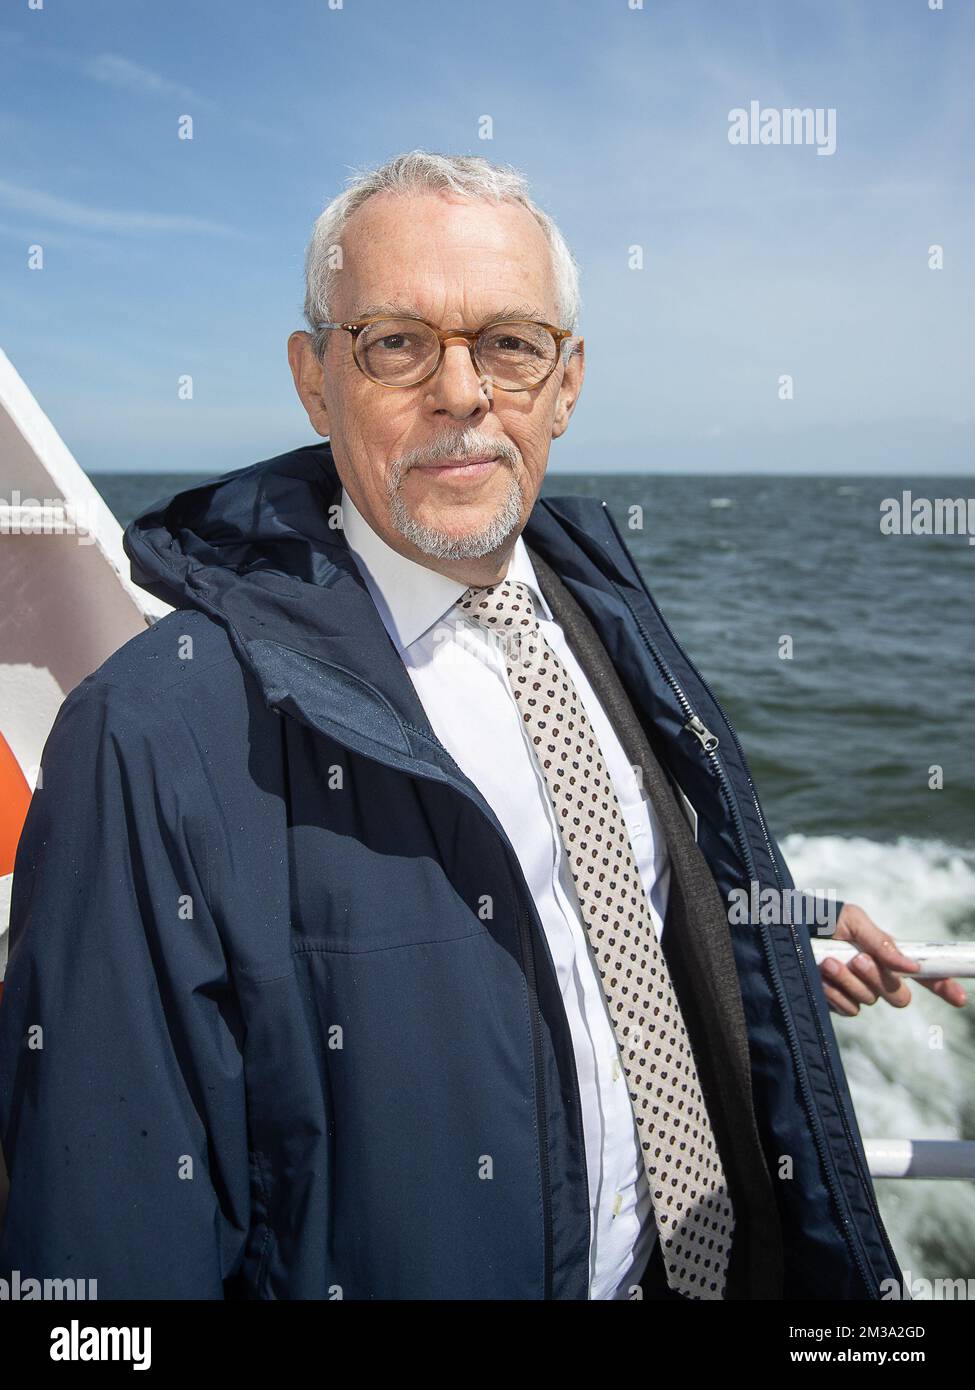 Colruyt Chairman and CEO Jef Colruyt pictured during a working visit to the offshore wind farms in the Belgian North Sea, in the port of Ostend, Friday 13 May 2022. Since the end of 2020, all 8 Belgian offshore wind farms (Norther, C-Power, Rentel, Northwind, Seamade (zones Seastar en Mermaid), Nobelwind, Belwind en Northwester II) have been operational, with a capacity of 2,262 MW. Belgium is in the world top with this. With the climate and energy crisis, exacerbated for several months by the war in Ukraine, Belgium wants to continue to focus on the production of green electricity in our Nort Stock Photo